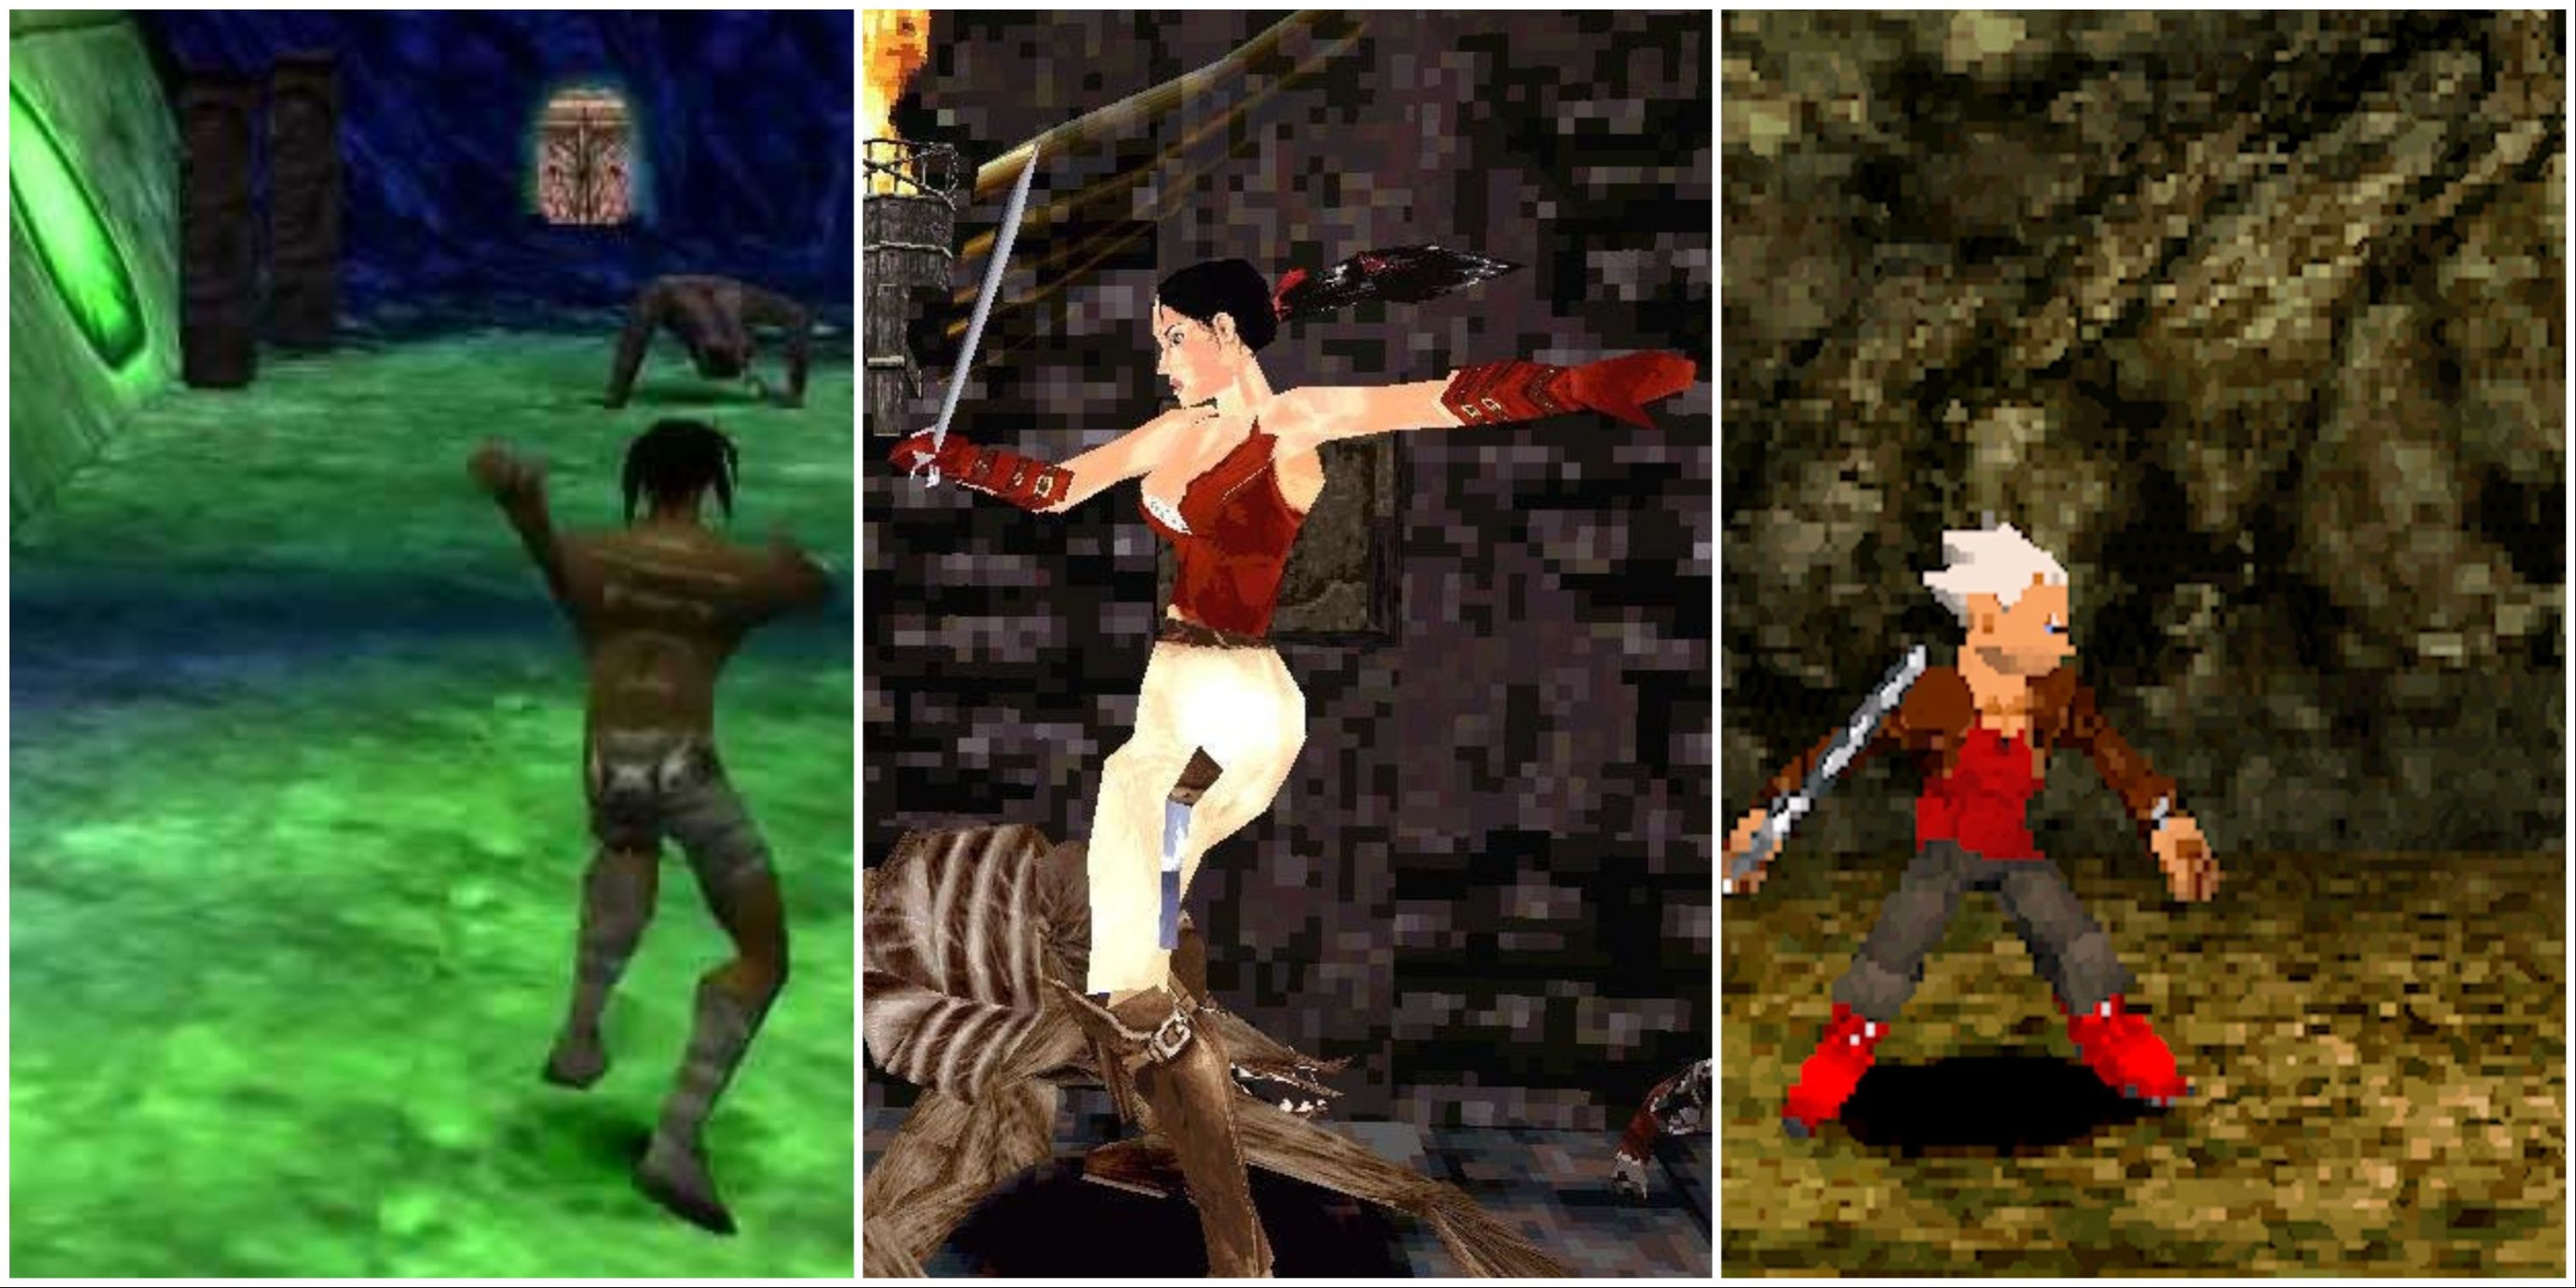 Forgotten Hack and Slash Games on PS1